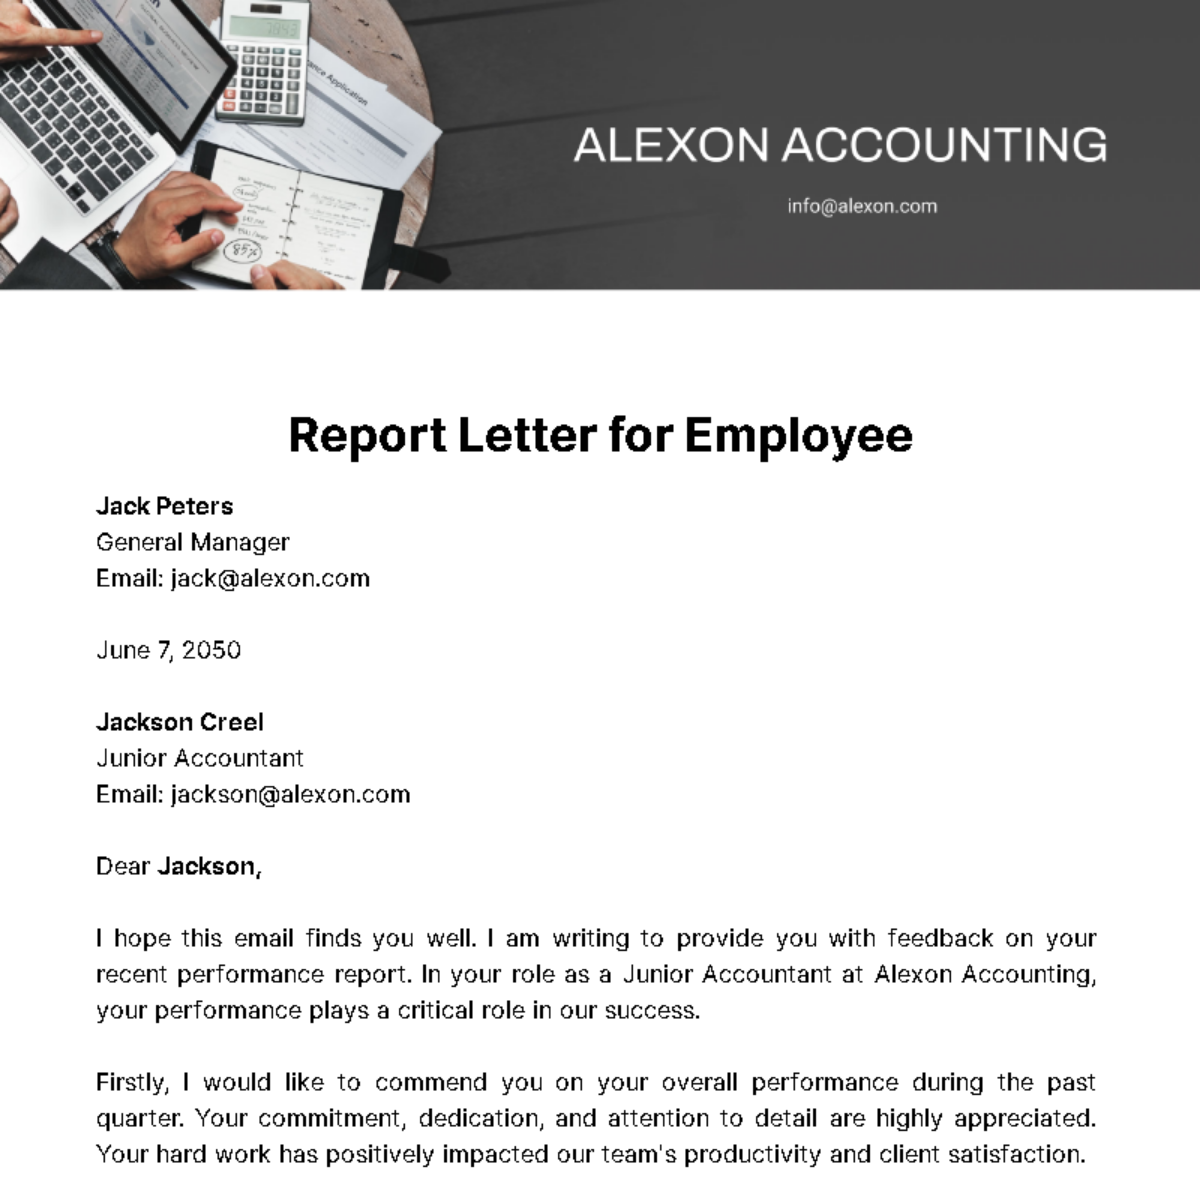 Report Letter for Employee  Template